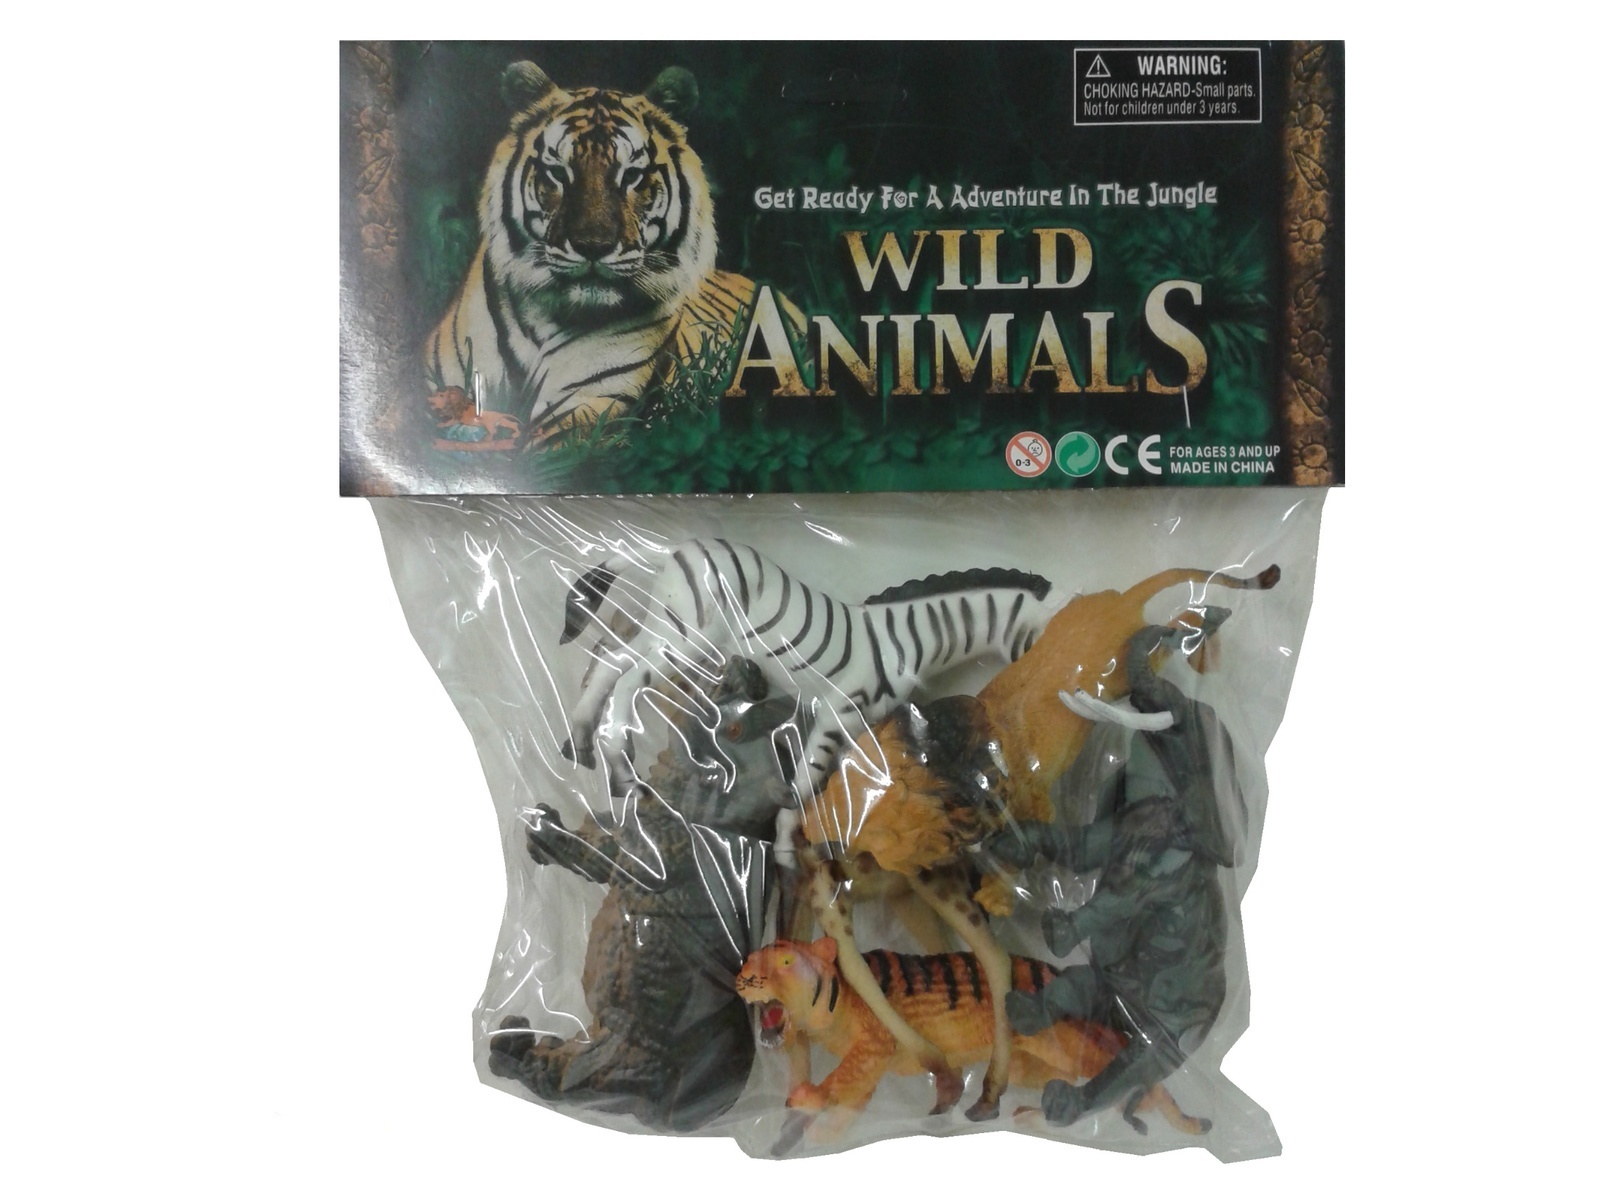 Wild Animal Jungle Figures | Buy Kids Toys Online at ihartTOYS